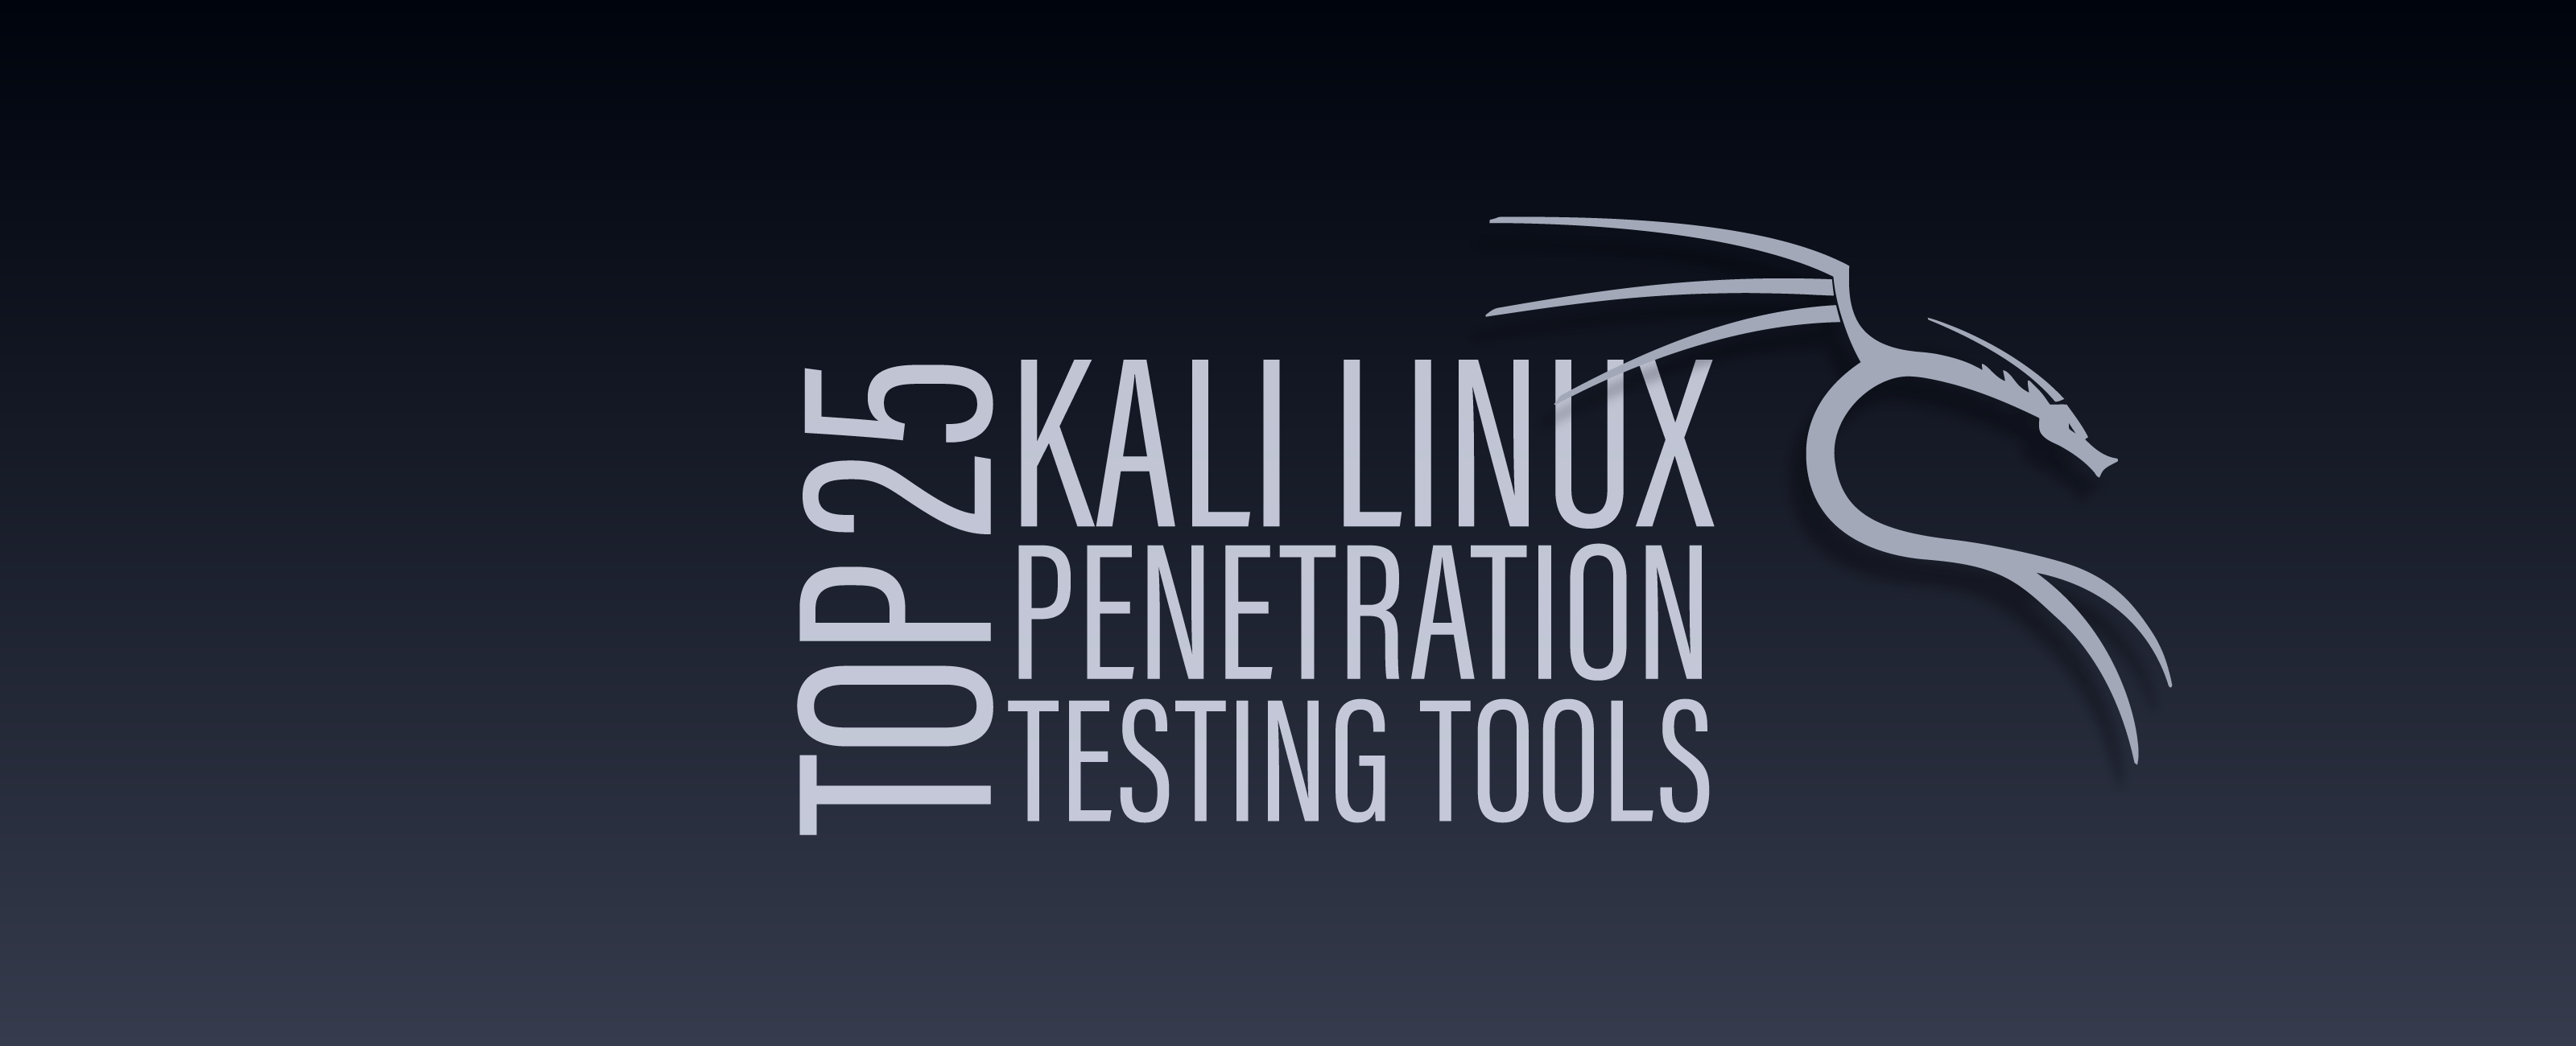 Wireless security penetrate Kali Linux Penetration Testing Tools